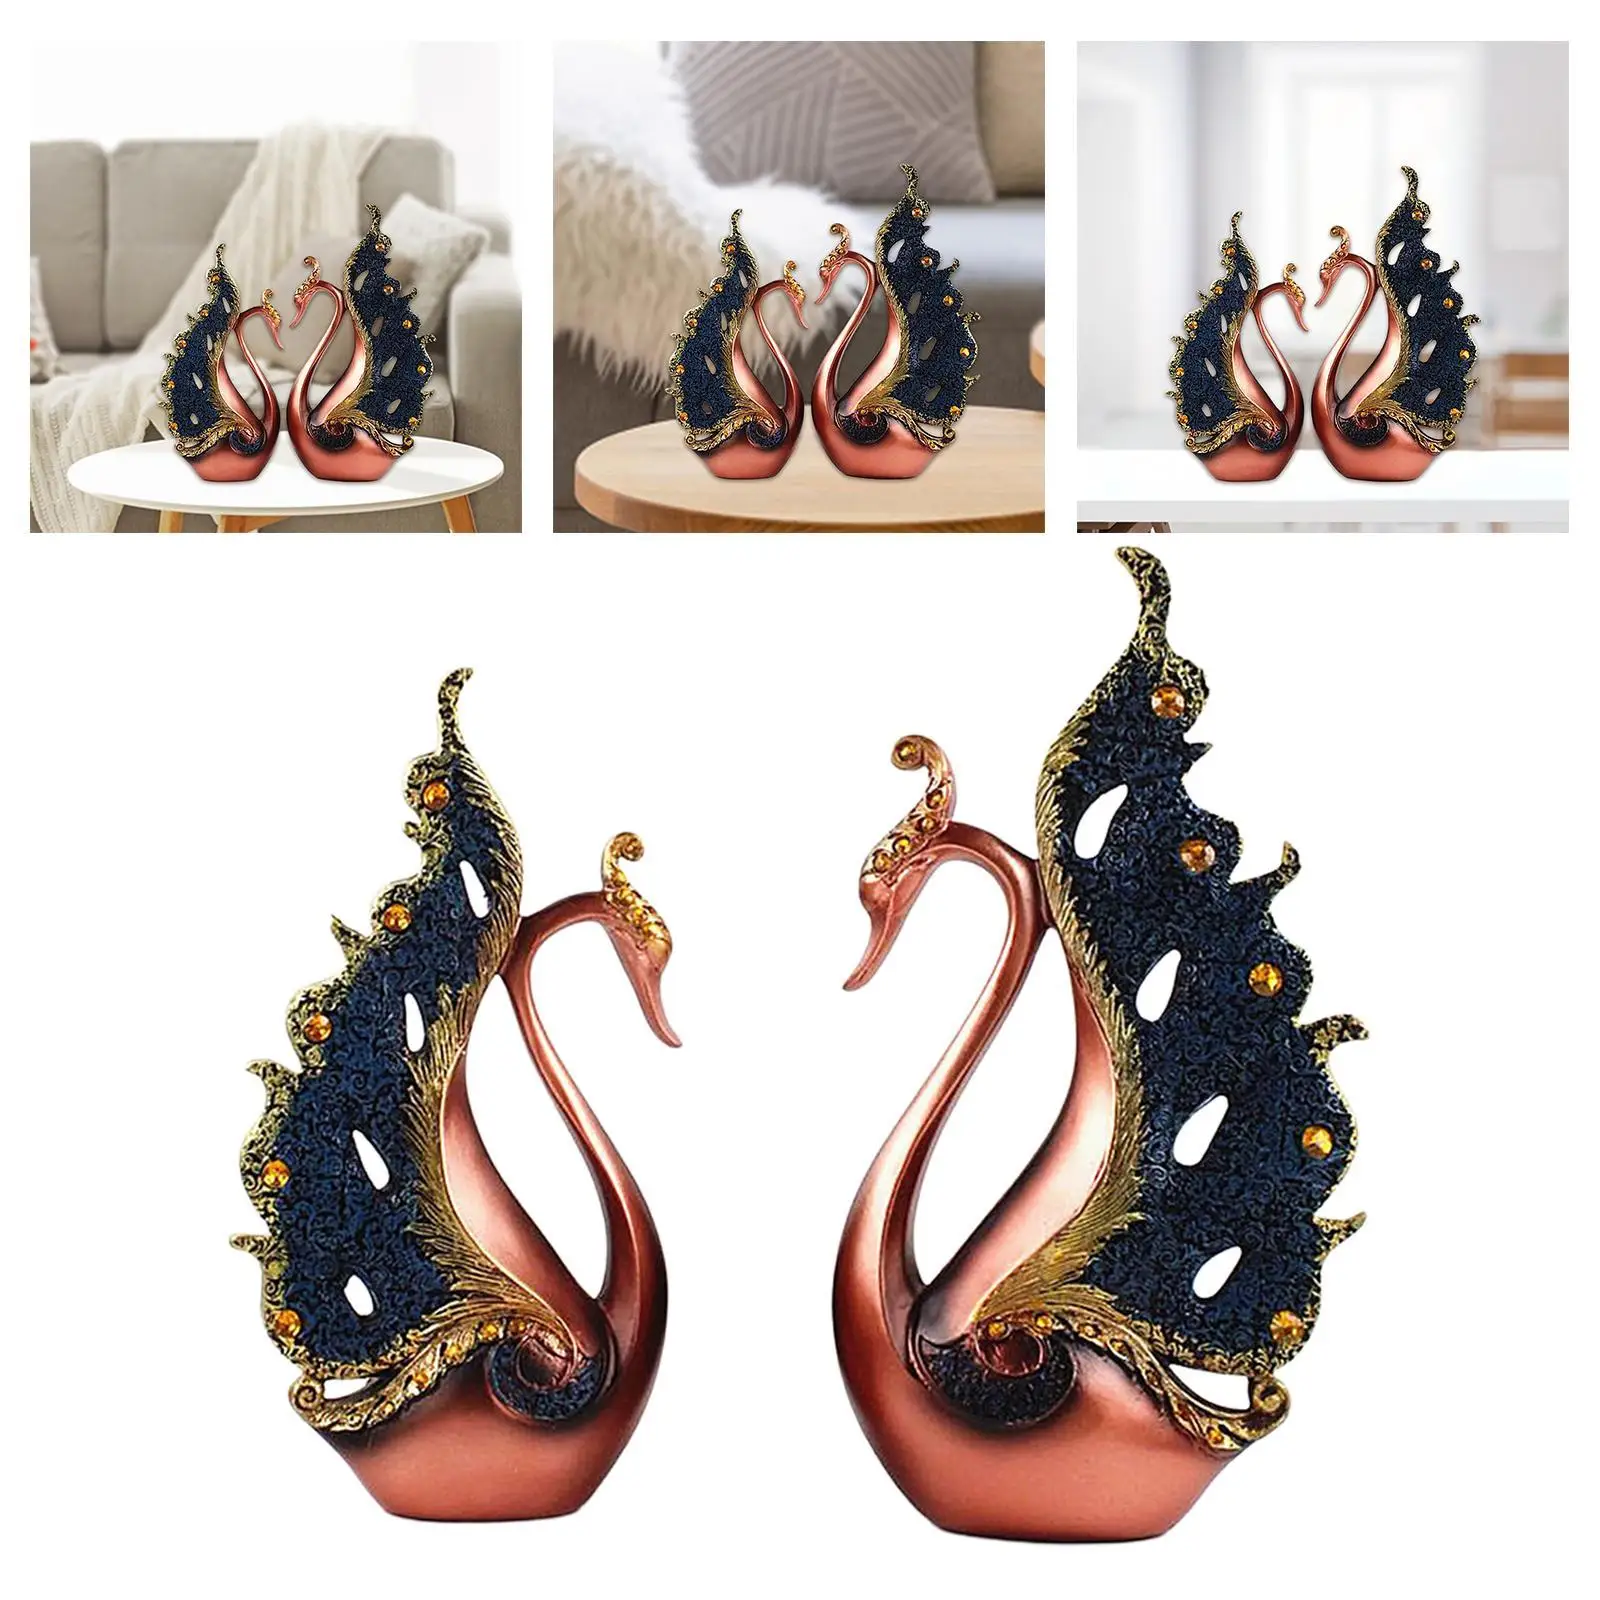 1  Couple of Swan Statue Figurines Resin Ornaments Tabletop  Decor